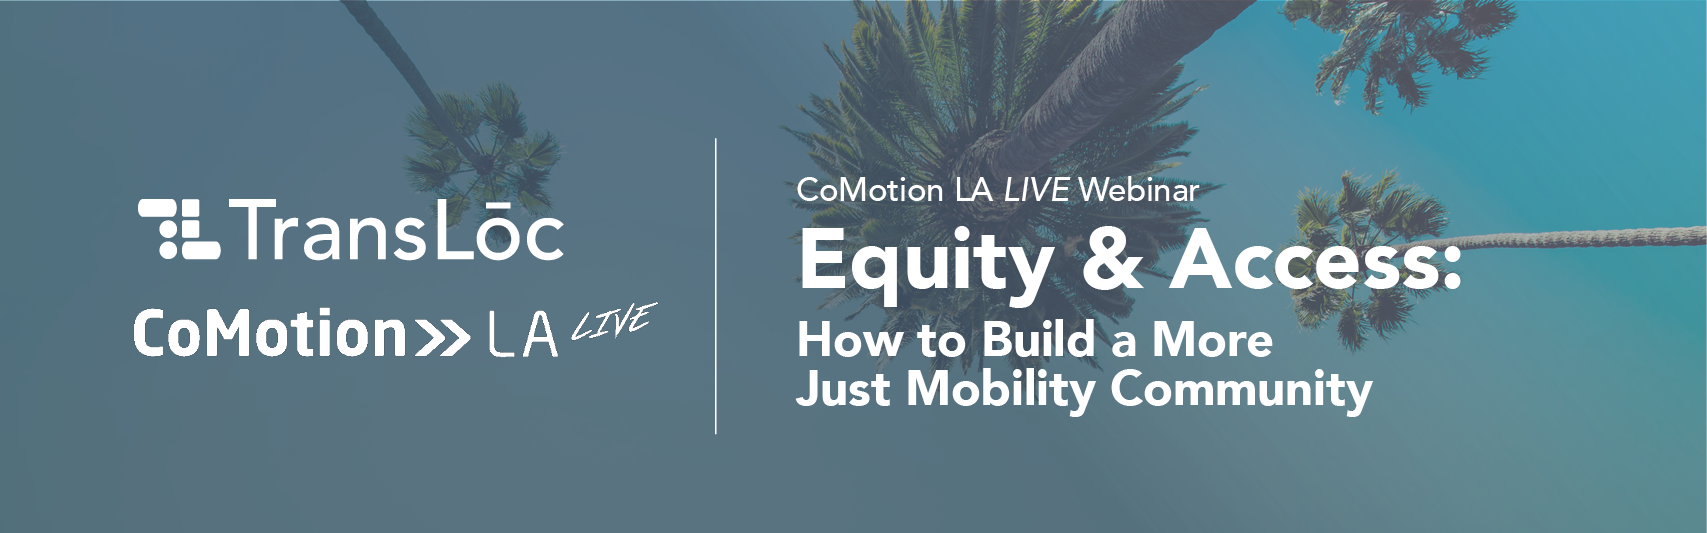 Equity & Access - Building a More Just Mobility Community